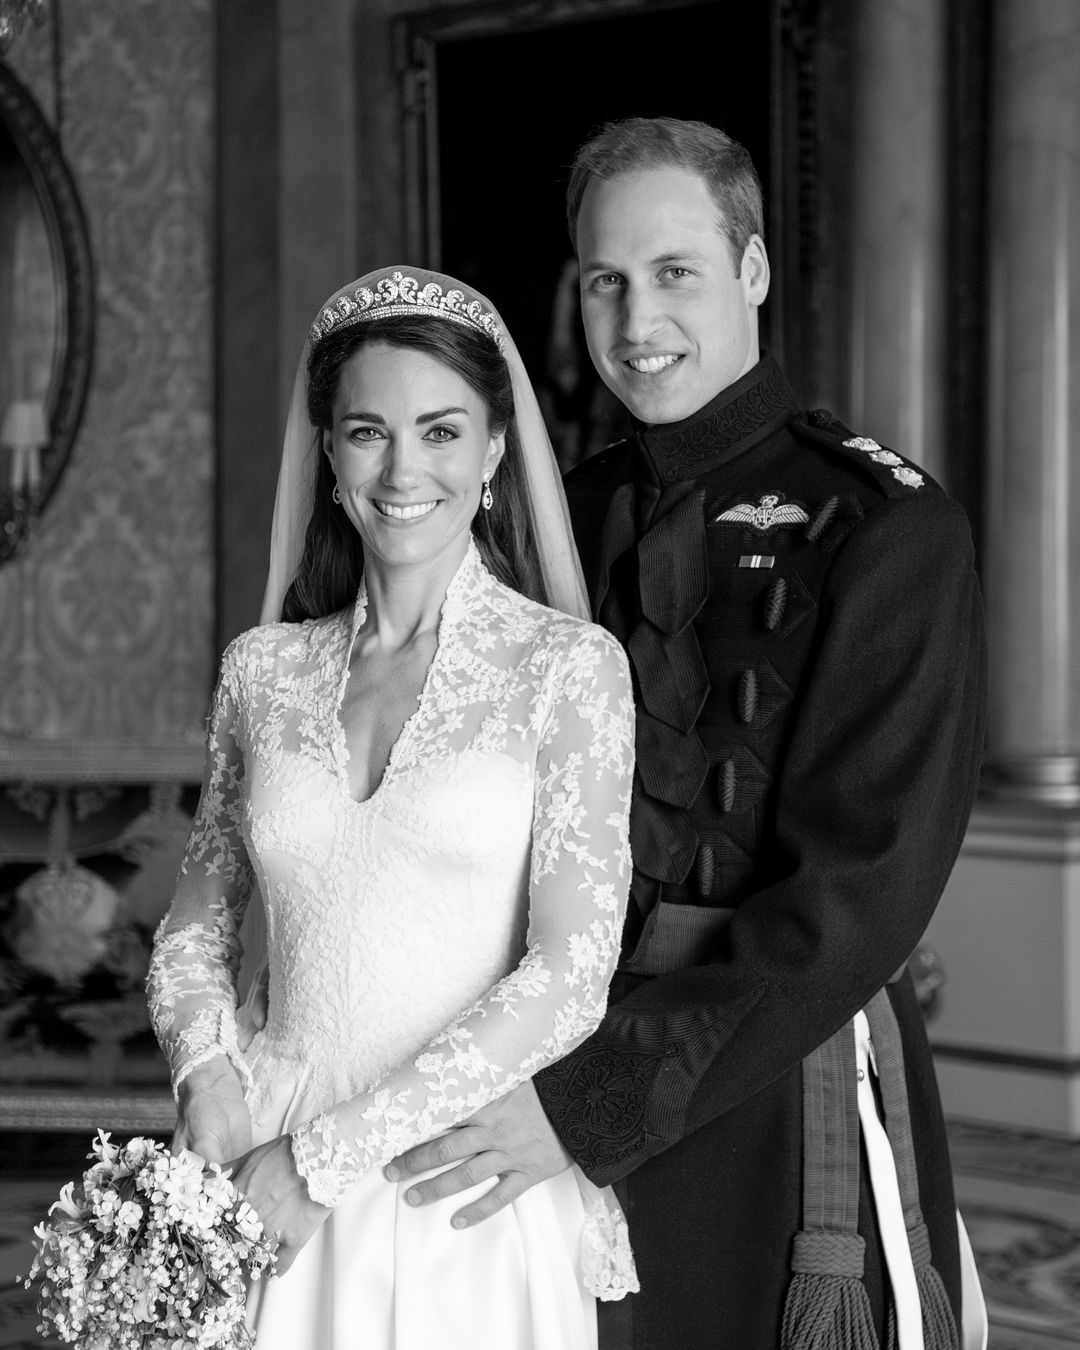 Prince William & Kate released a never-before-seen photo from their 2011 wedding